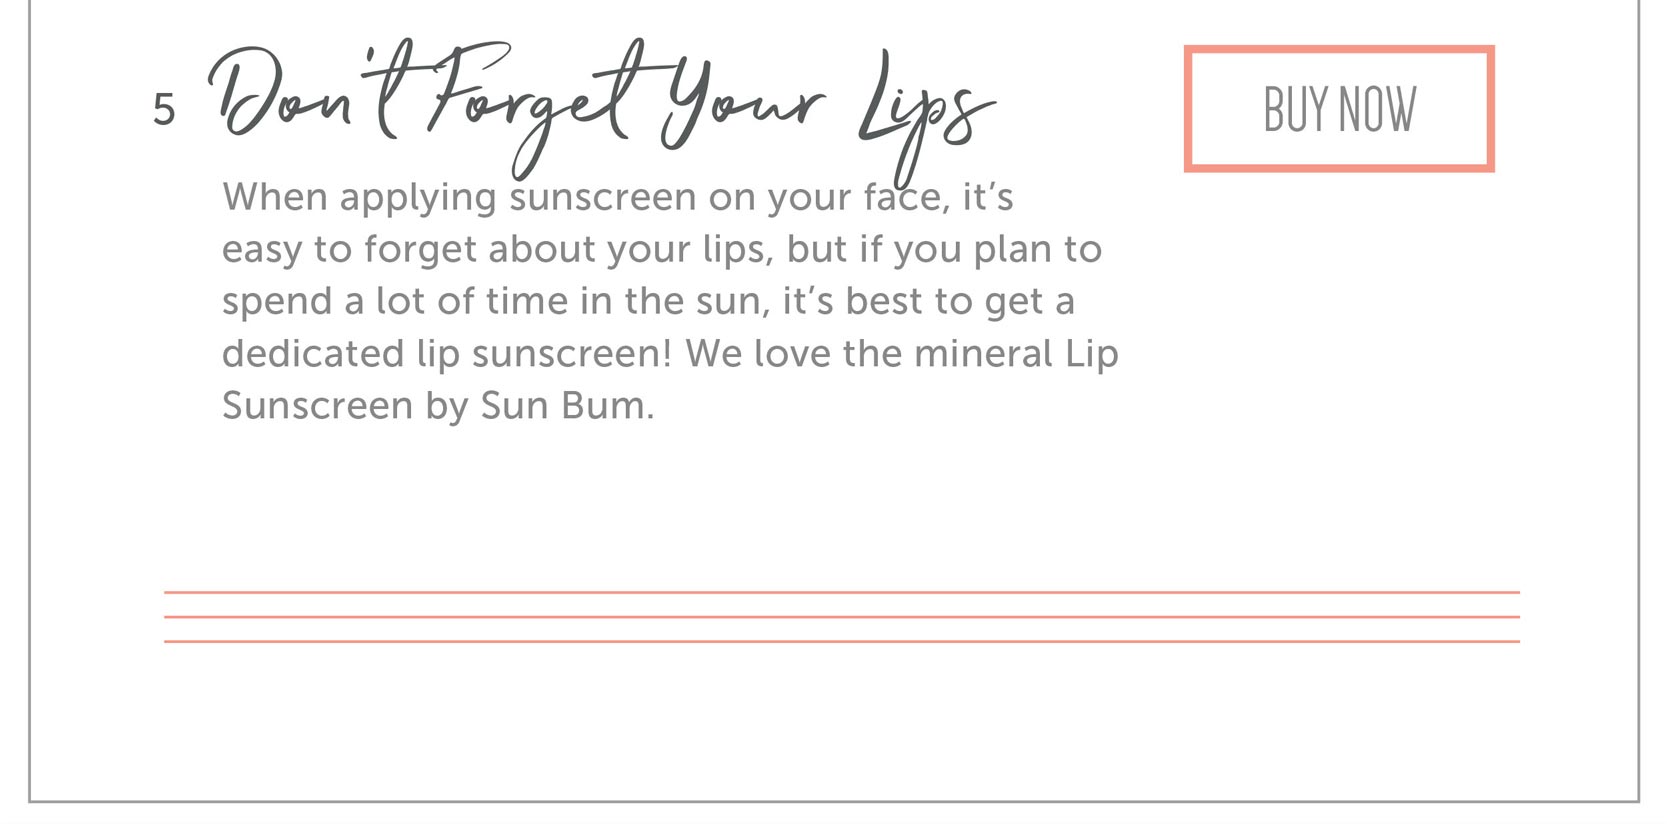 Don’t Forget Your Lips When applying sunscreen on your face, it’s easy to forget about your lips, but if you plan to spend a lot of time in the sun, it’s best to get a dedicated lip sunscreen! We love the mineral Lip Sunscreen by Sun Bum.